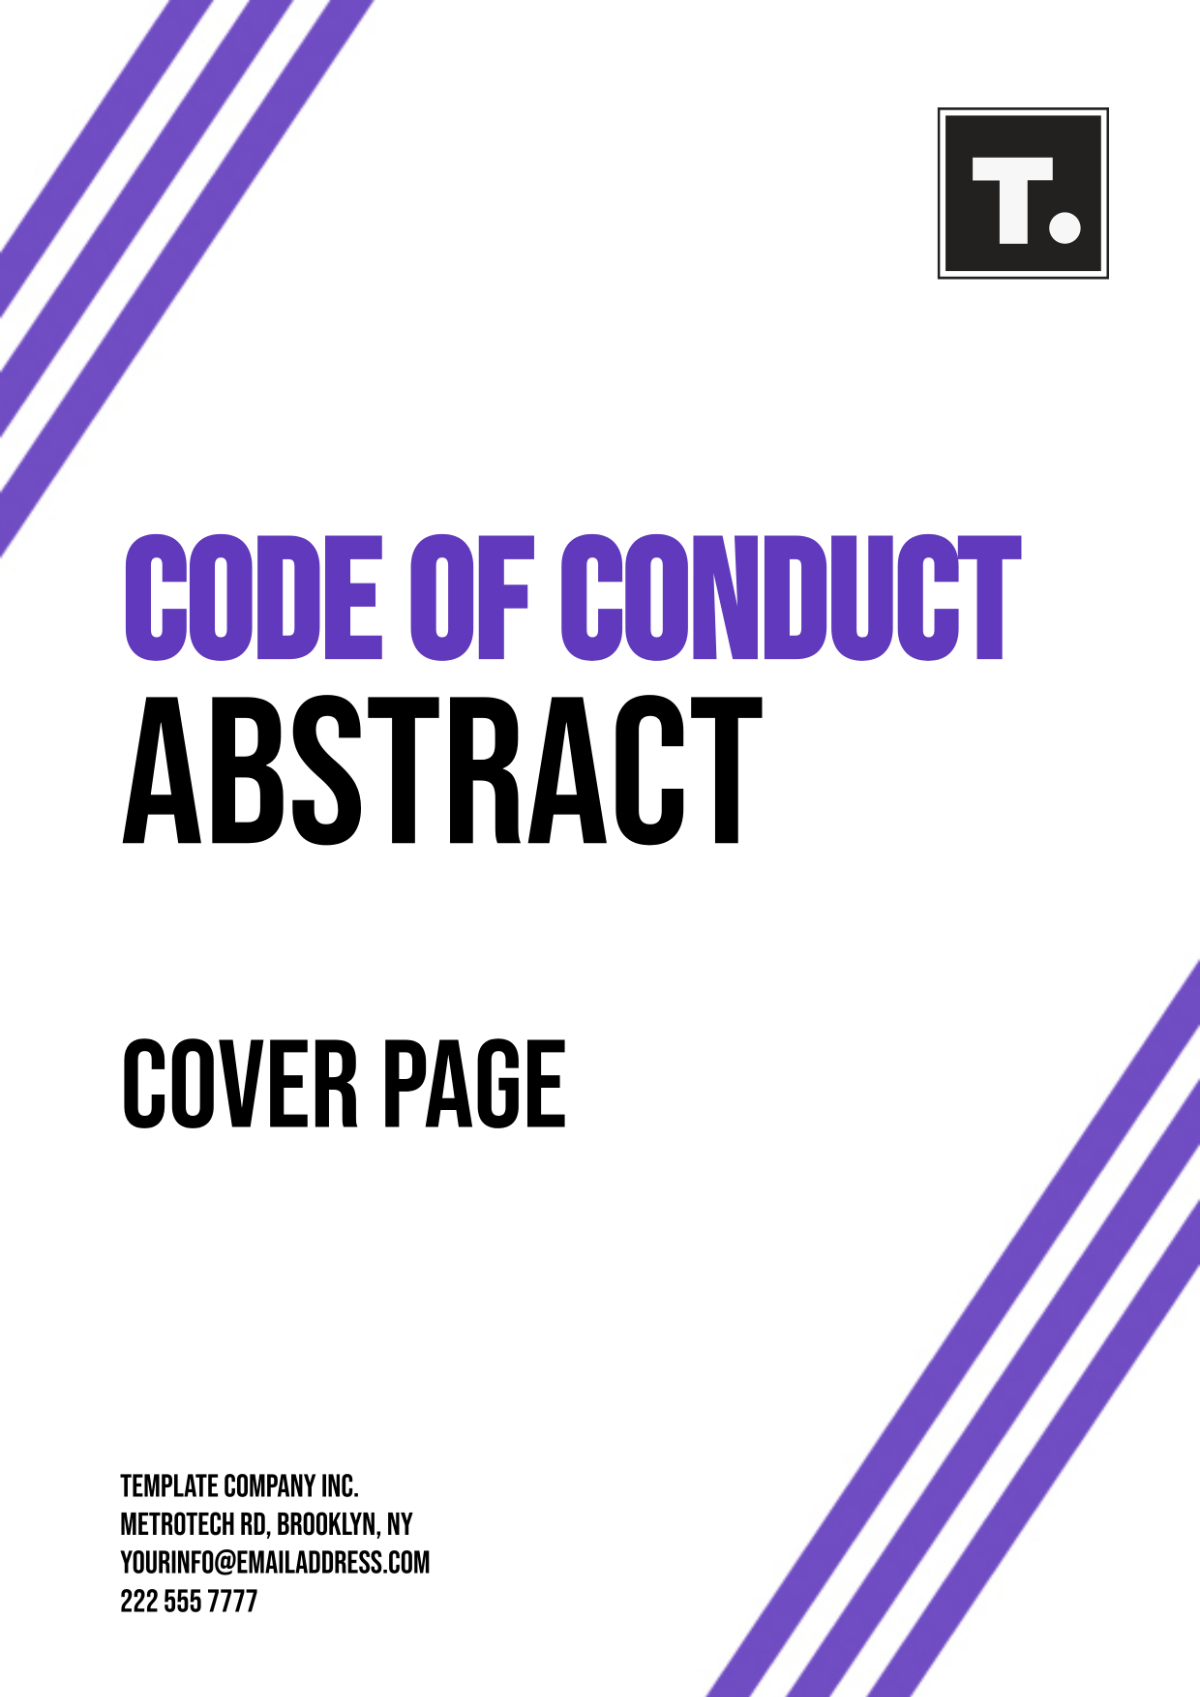 Code of Conduct Abstract Cover Page